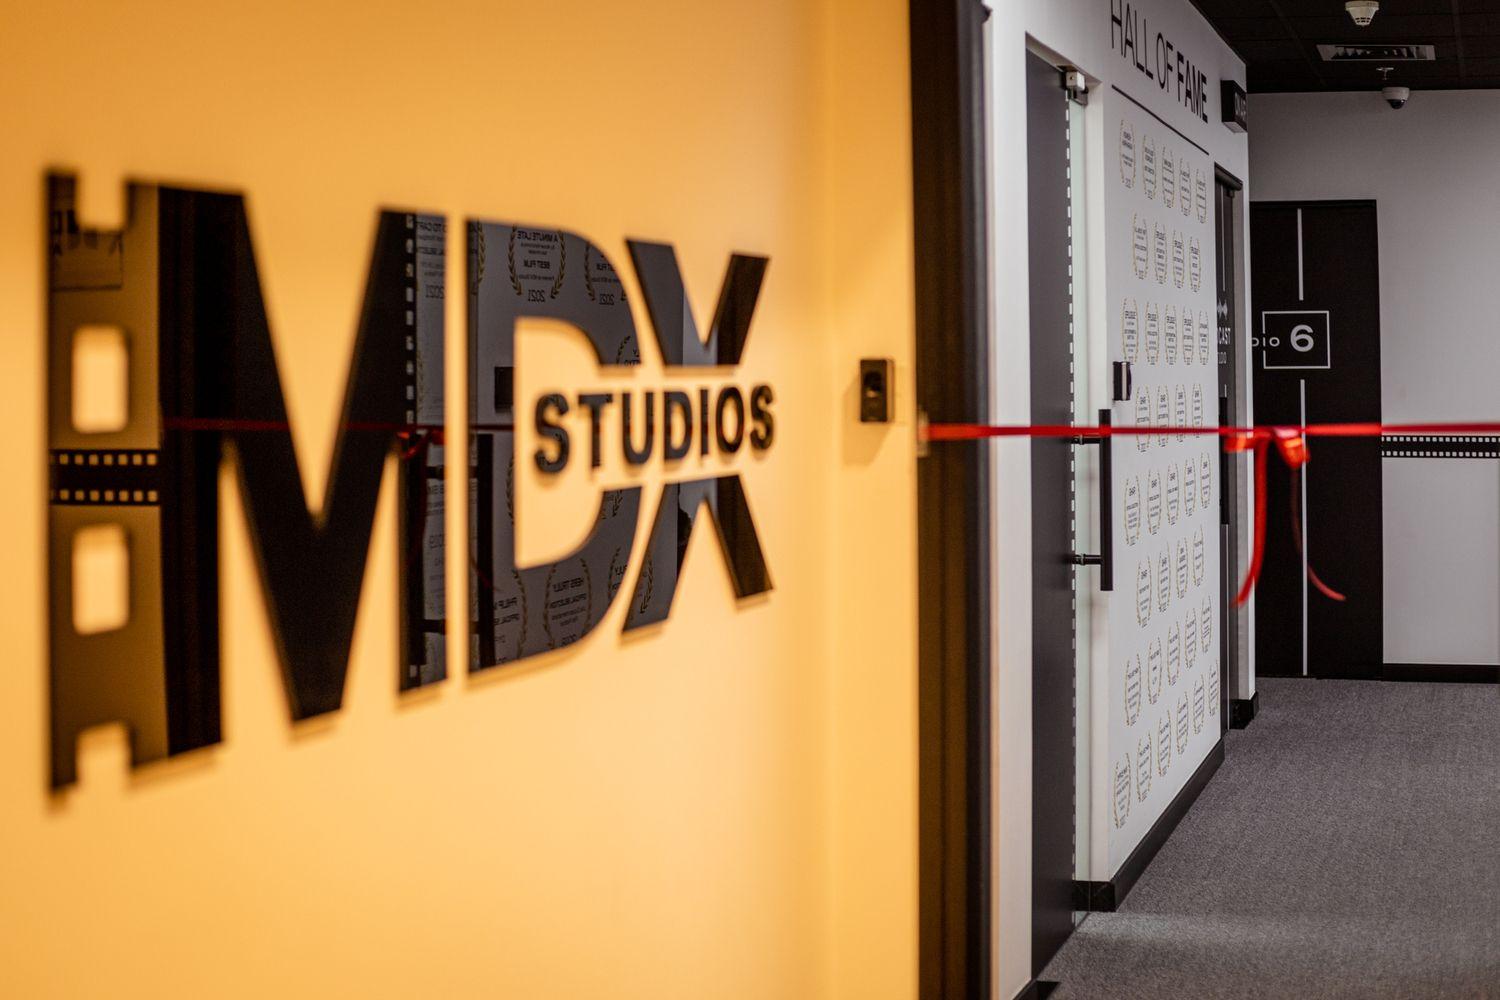 We are delighted to unveil our enhanced, state-of-the-art Film Lab, MDX Studios. Designed to provide an immersive and holistic film education and support the development of the UAE's burgeoning film sector, MDX Studios provides our talented student filmmakers with exclusive access to state-of-the-art equipment, including RED camera kits, a dedicated Podcast Studio, Dolby Atmos Theatre and Mixing Studio, recording studio, and many more facilities as part of the studio setup.